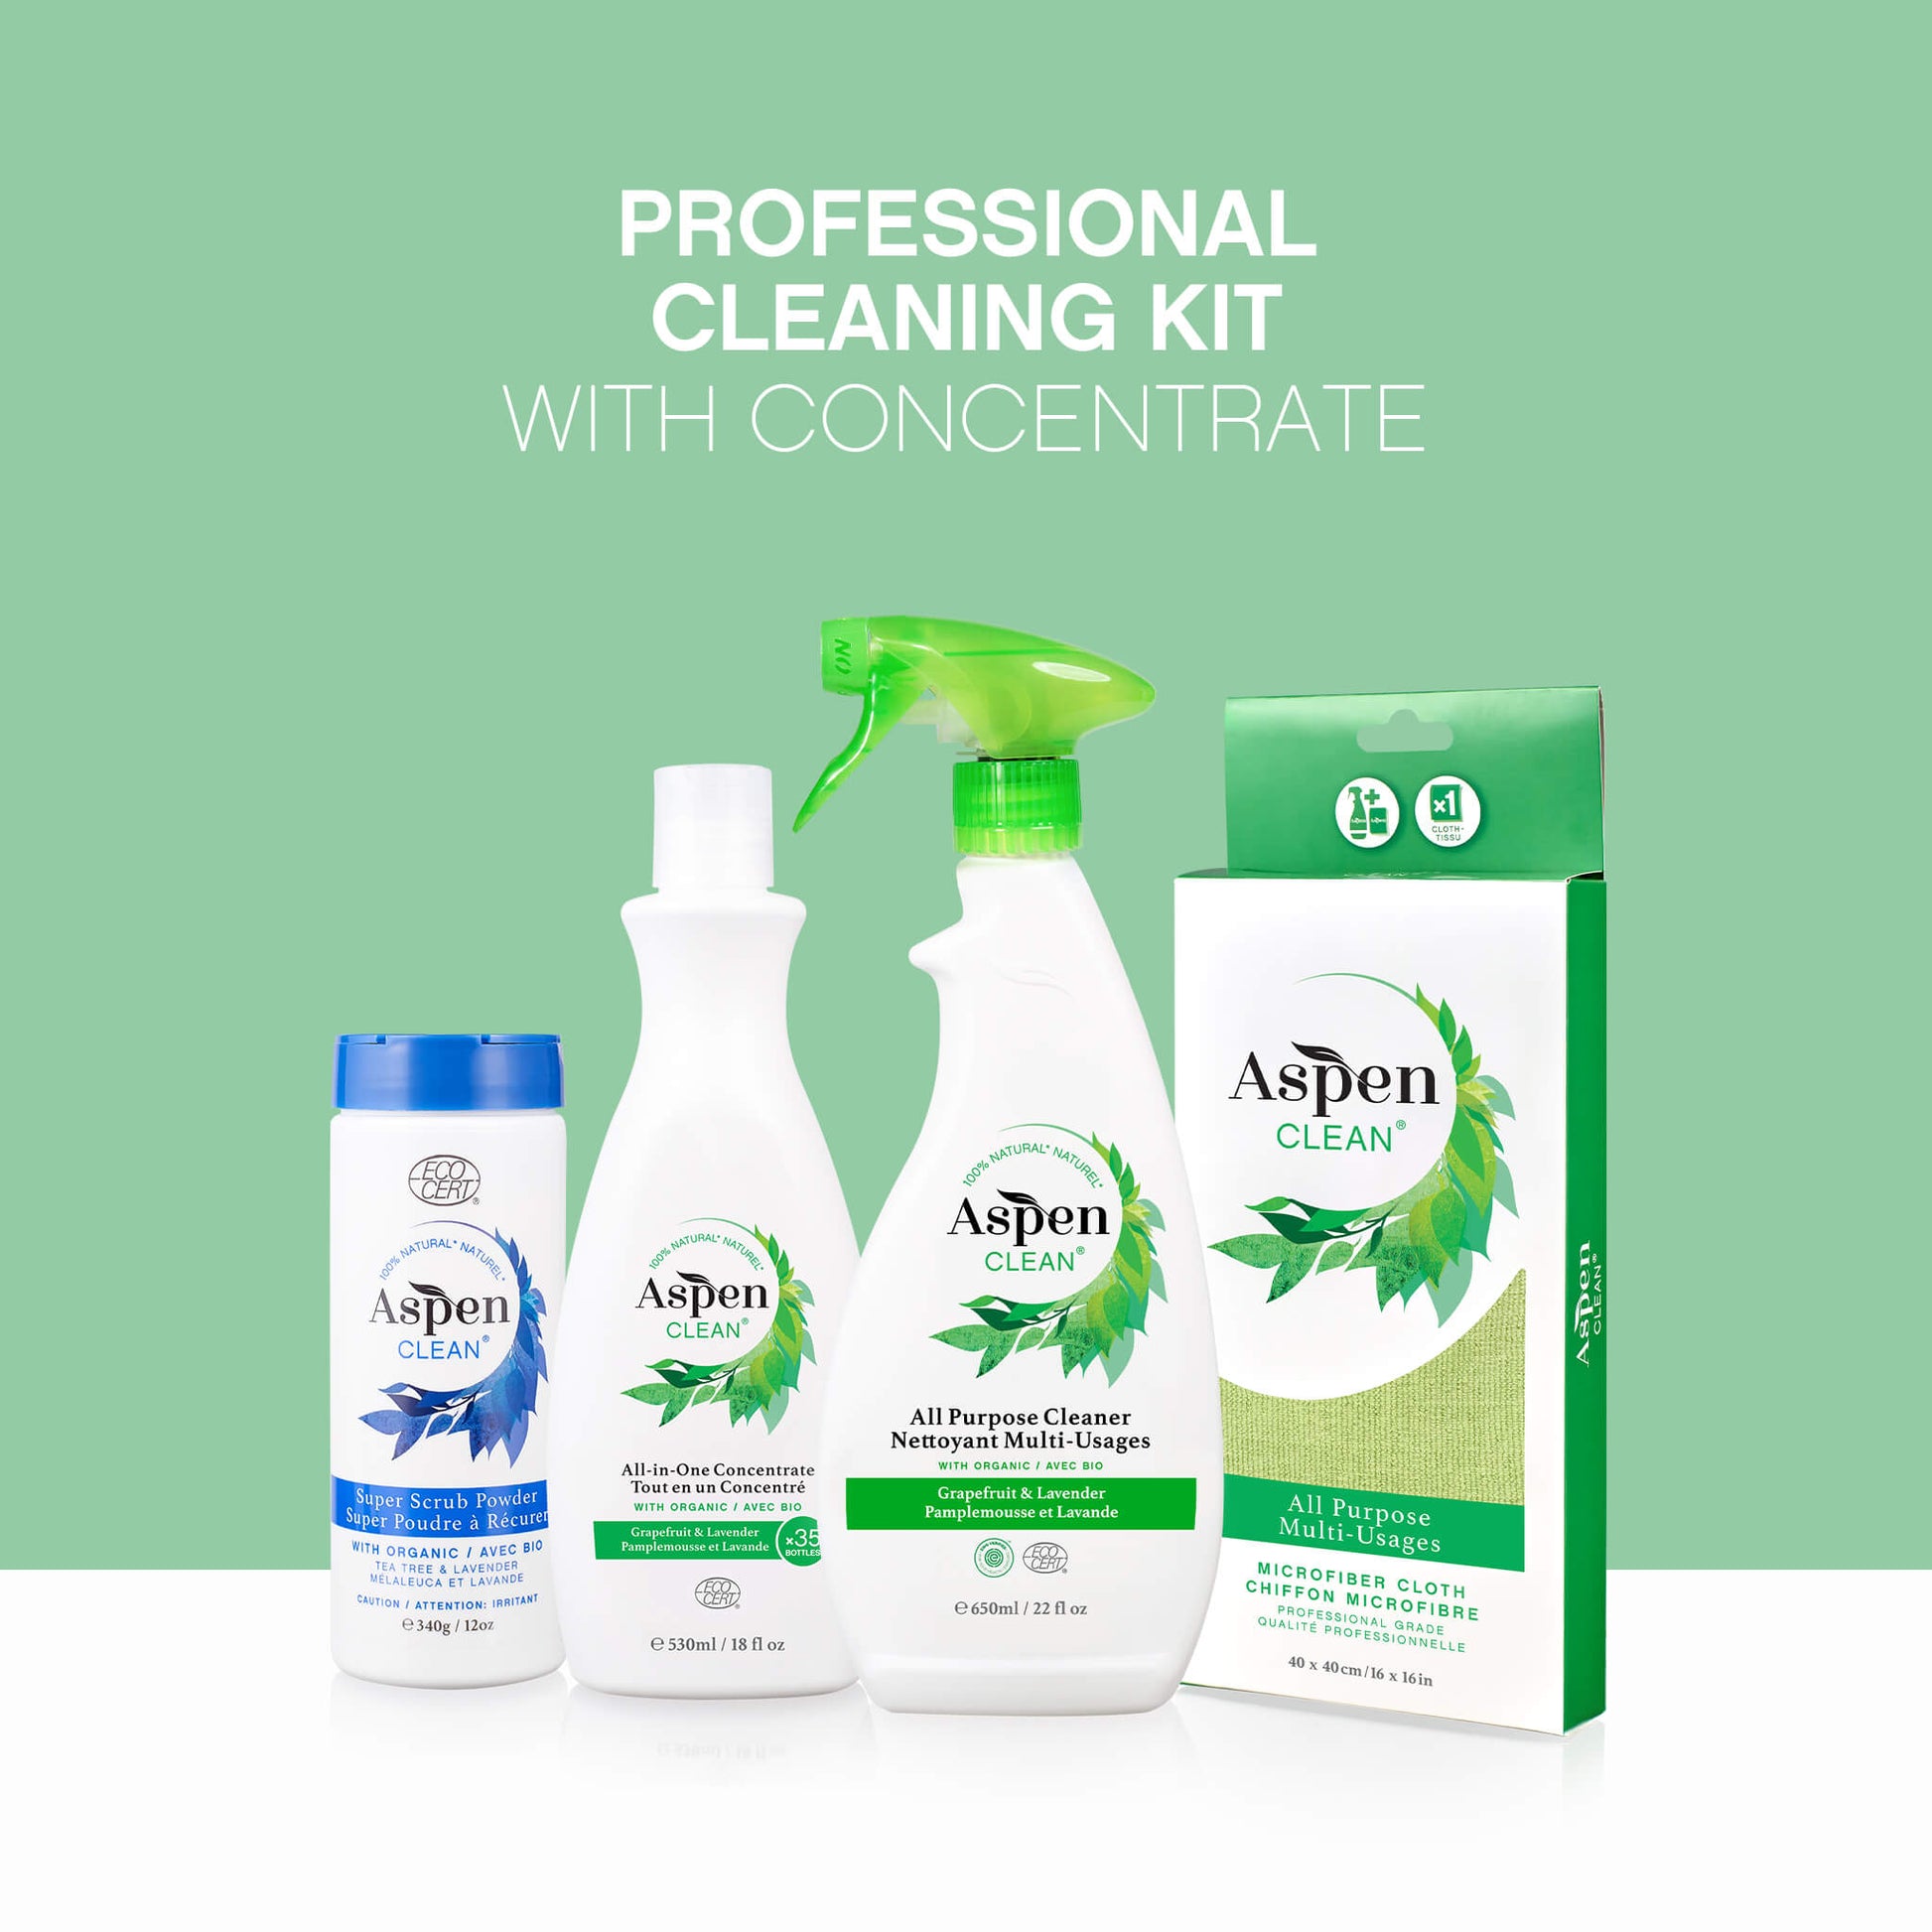 Professional Cleaning Kit with Concentrate